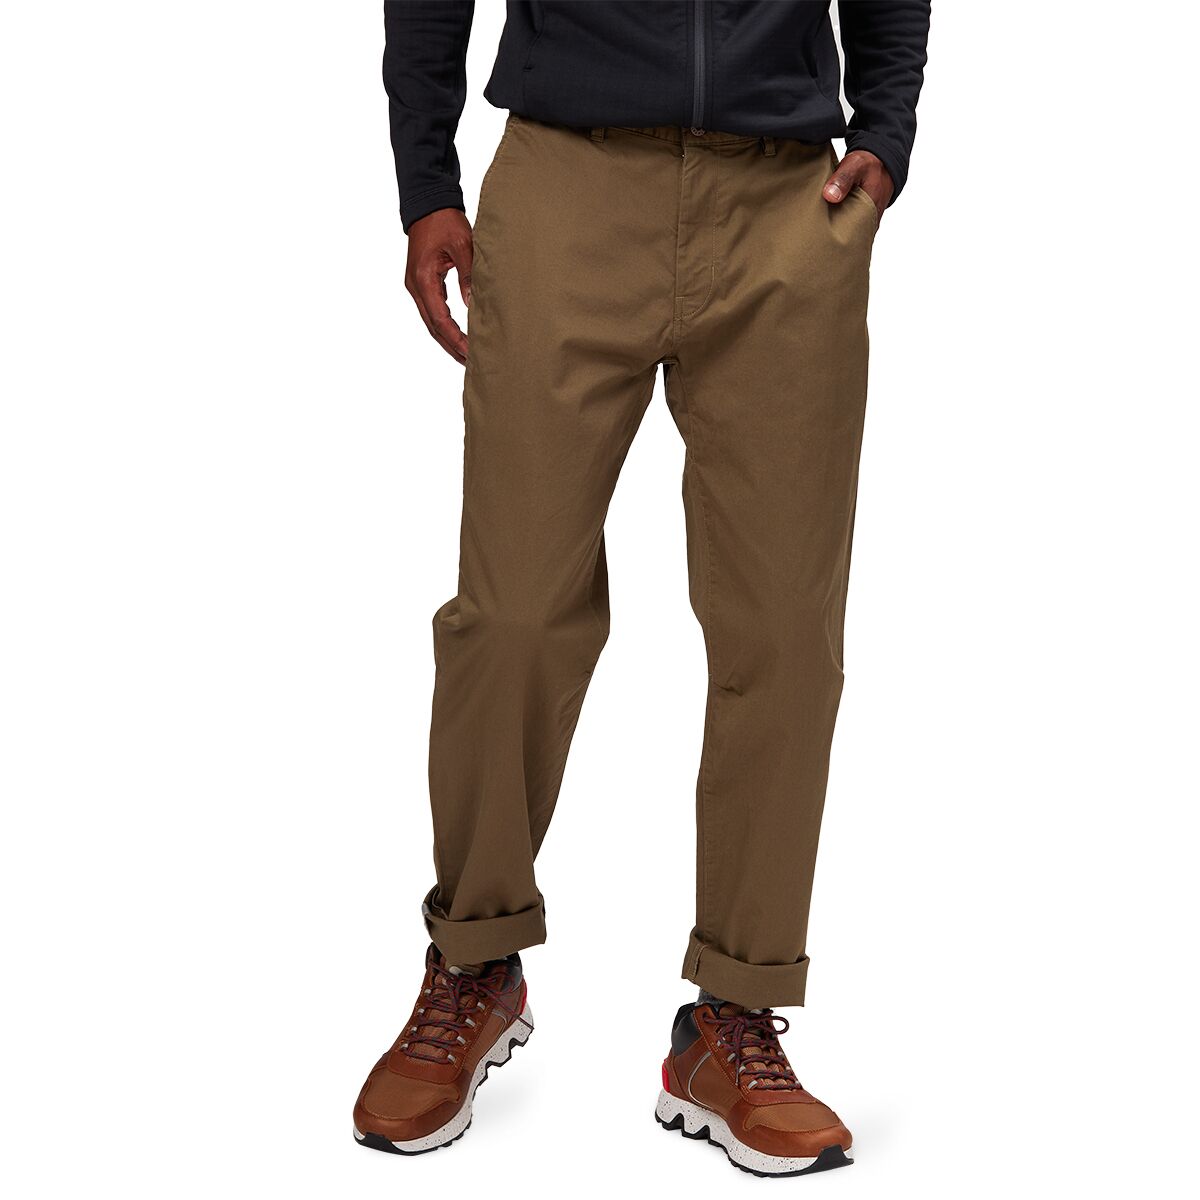 north face motion pants review